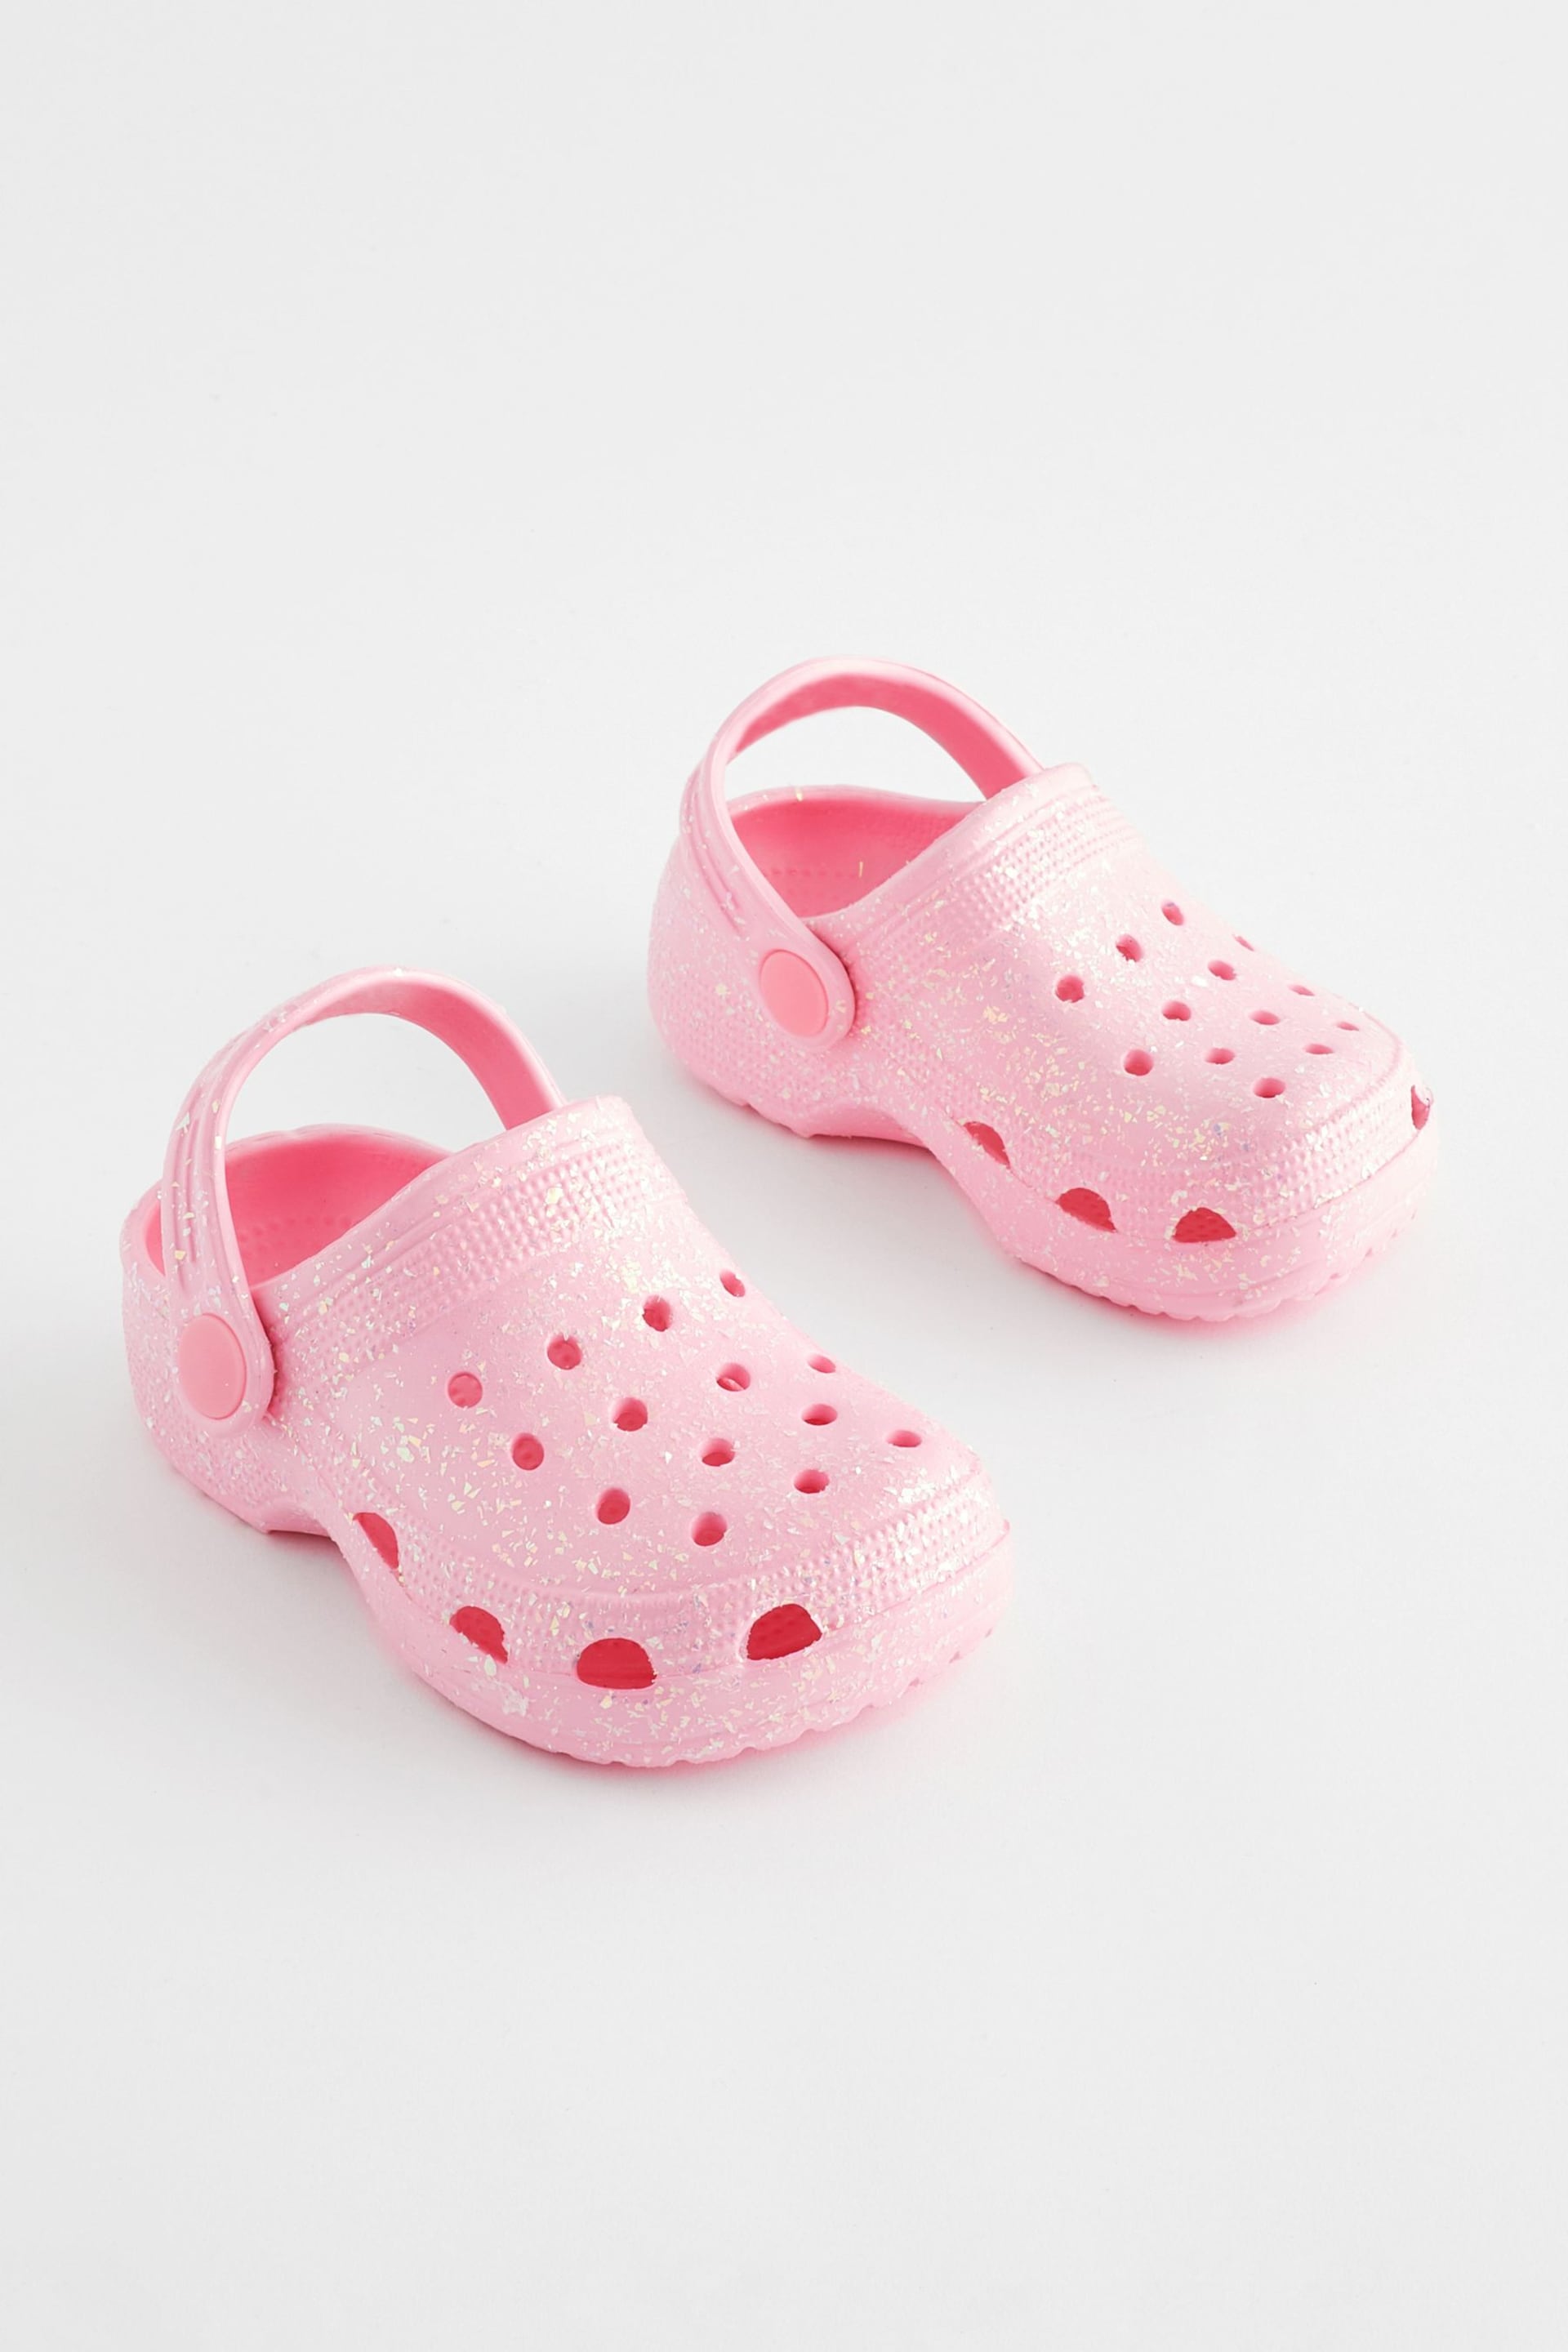 Pink Glitter Clogs - Image 1 of 5